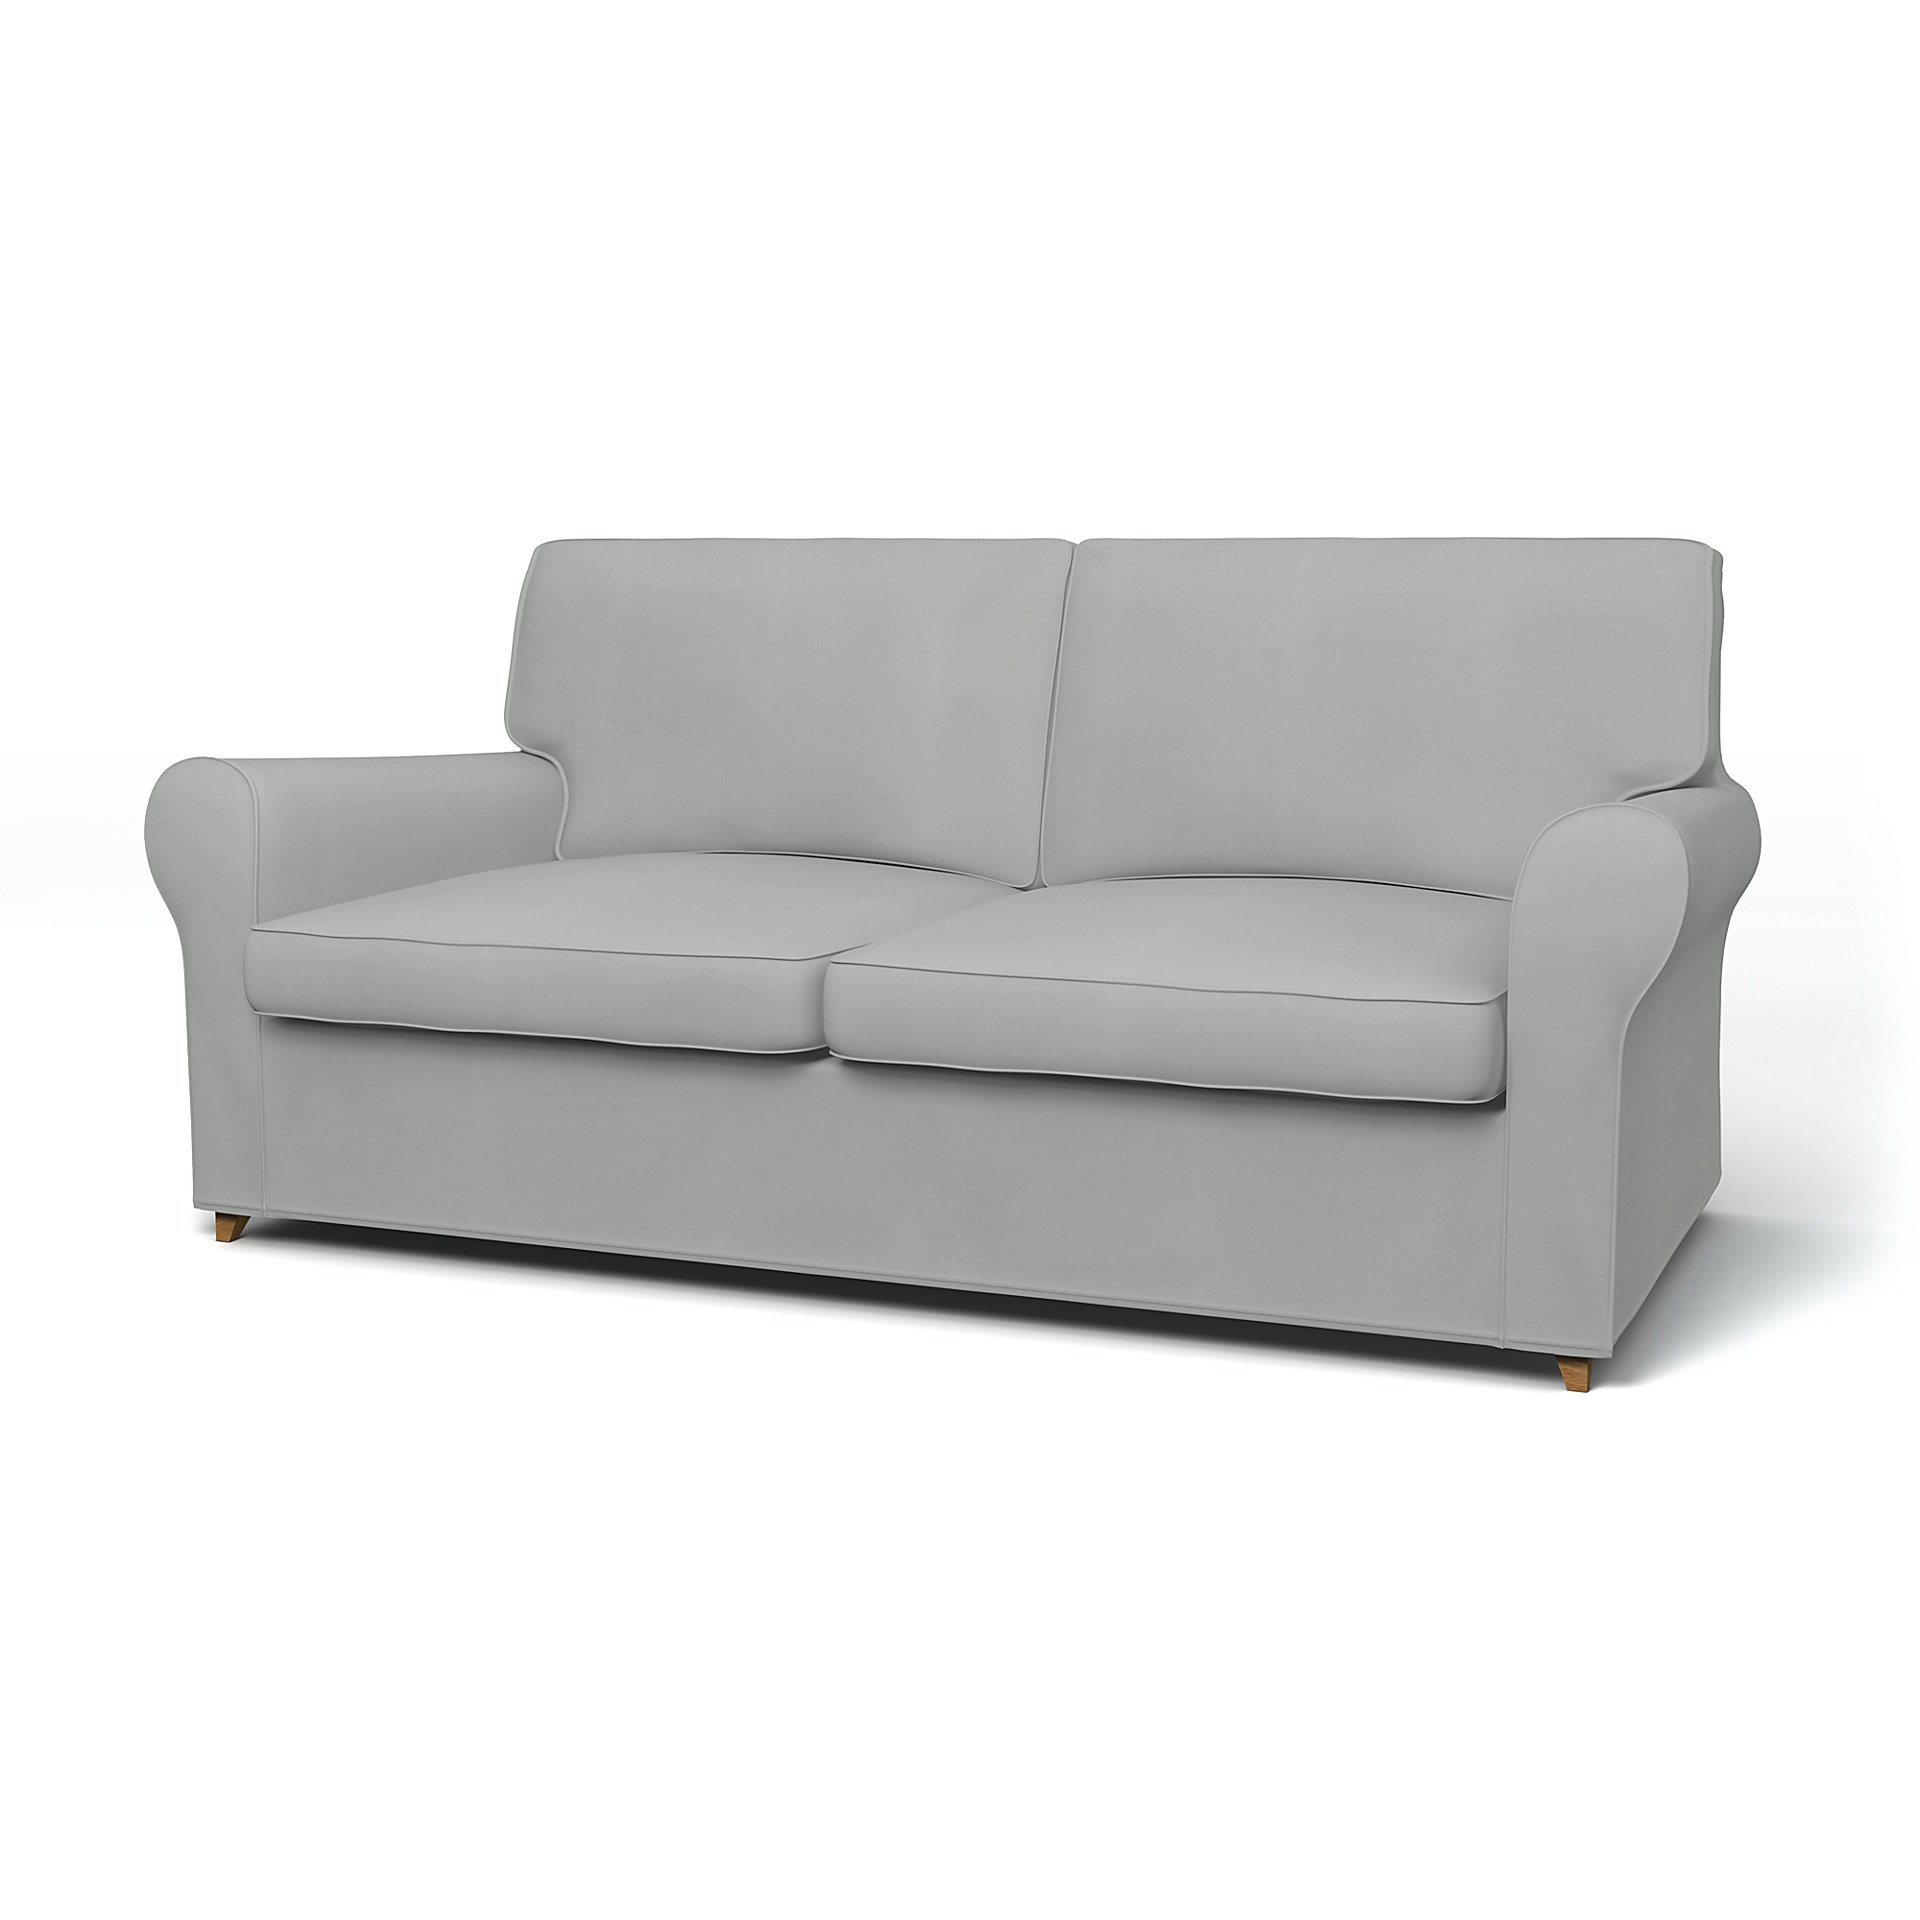 IKEA - Angby Sofa Bed Cover, Silver Grey, Cotton - Bemz